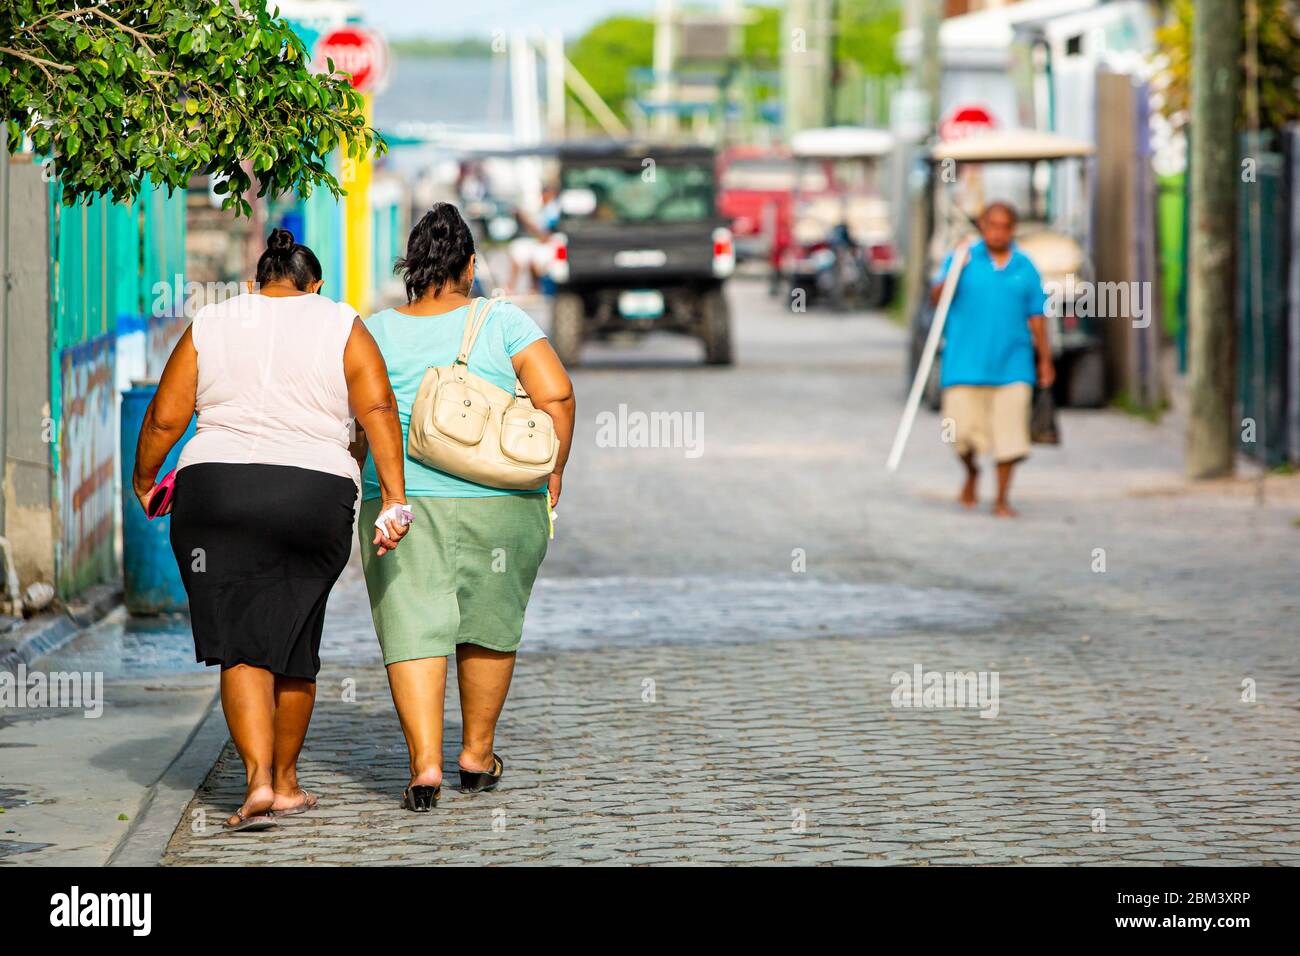 Premium Photo  A curvy overweight African American woman poses on a city  street